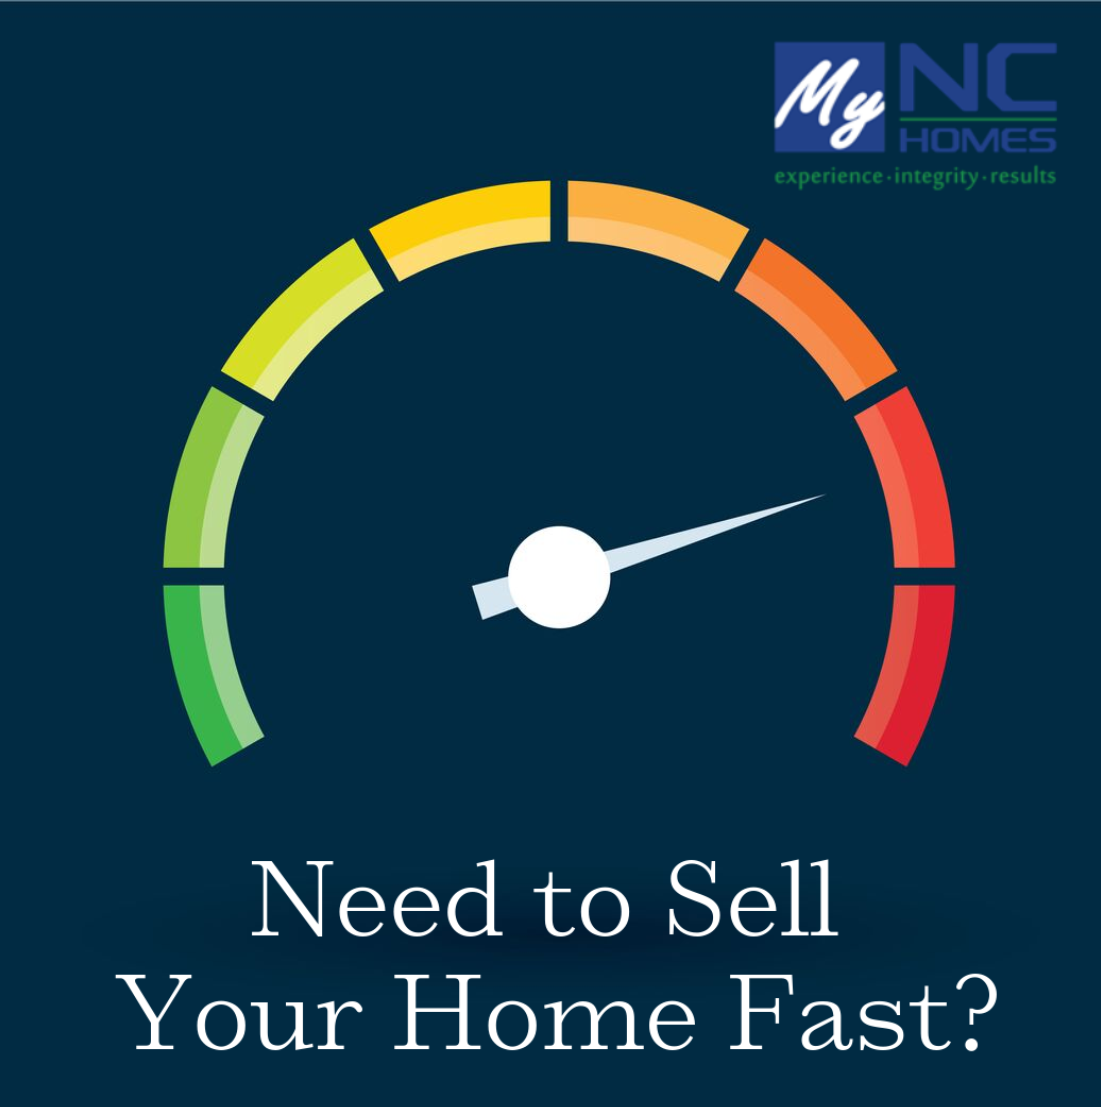 Sell Your Home Fast with My NC Homes